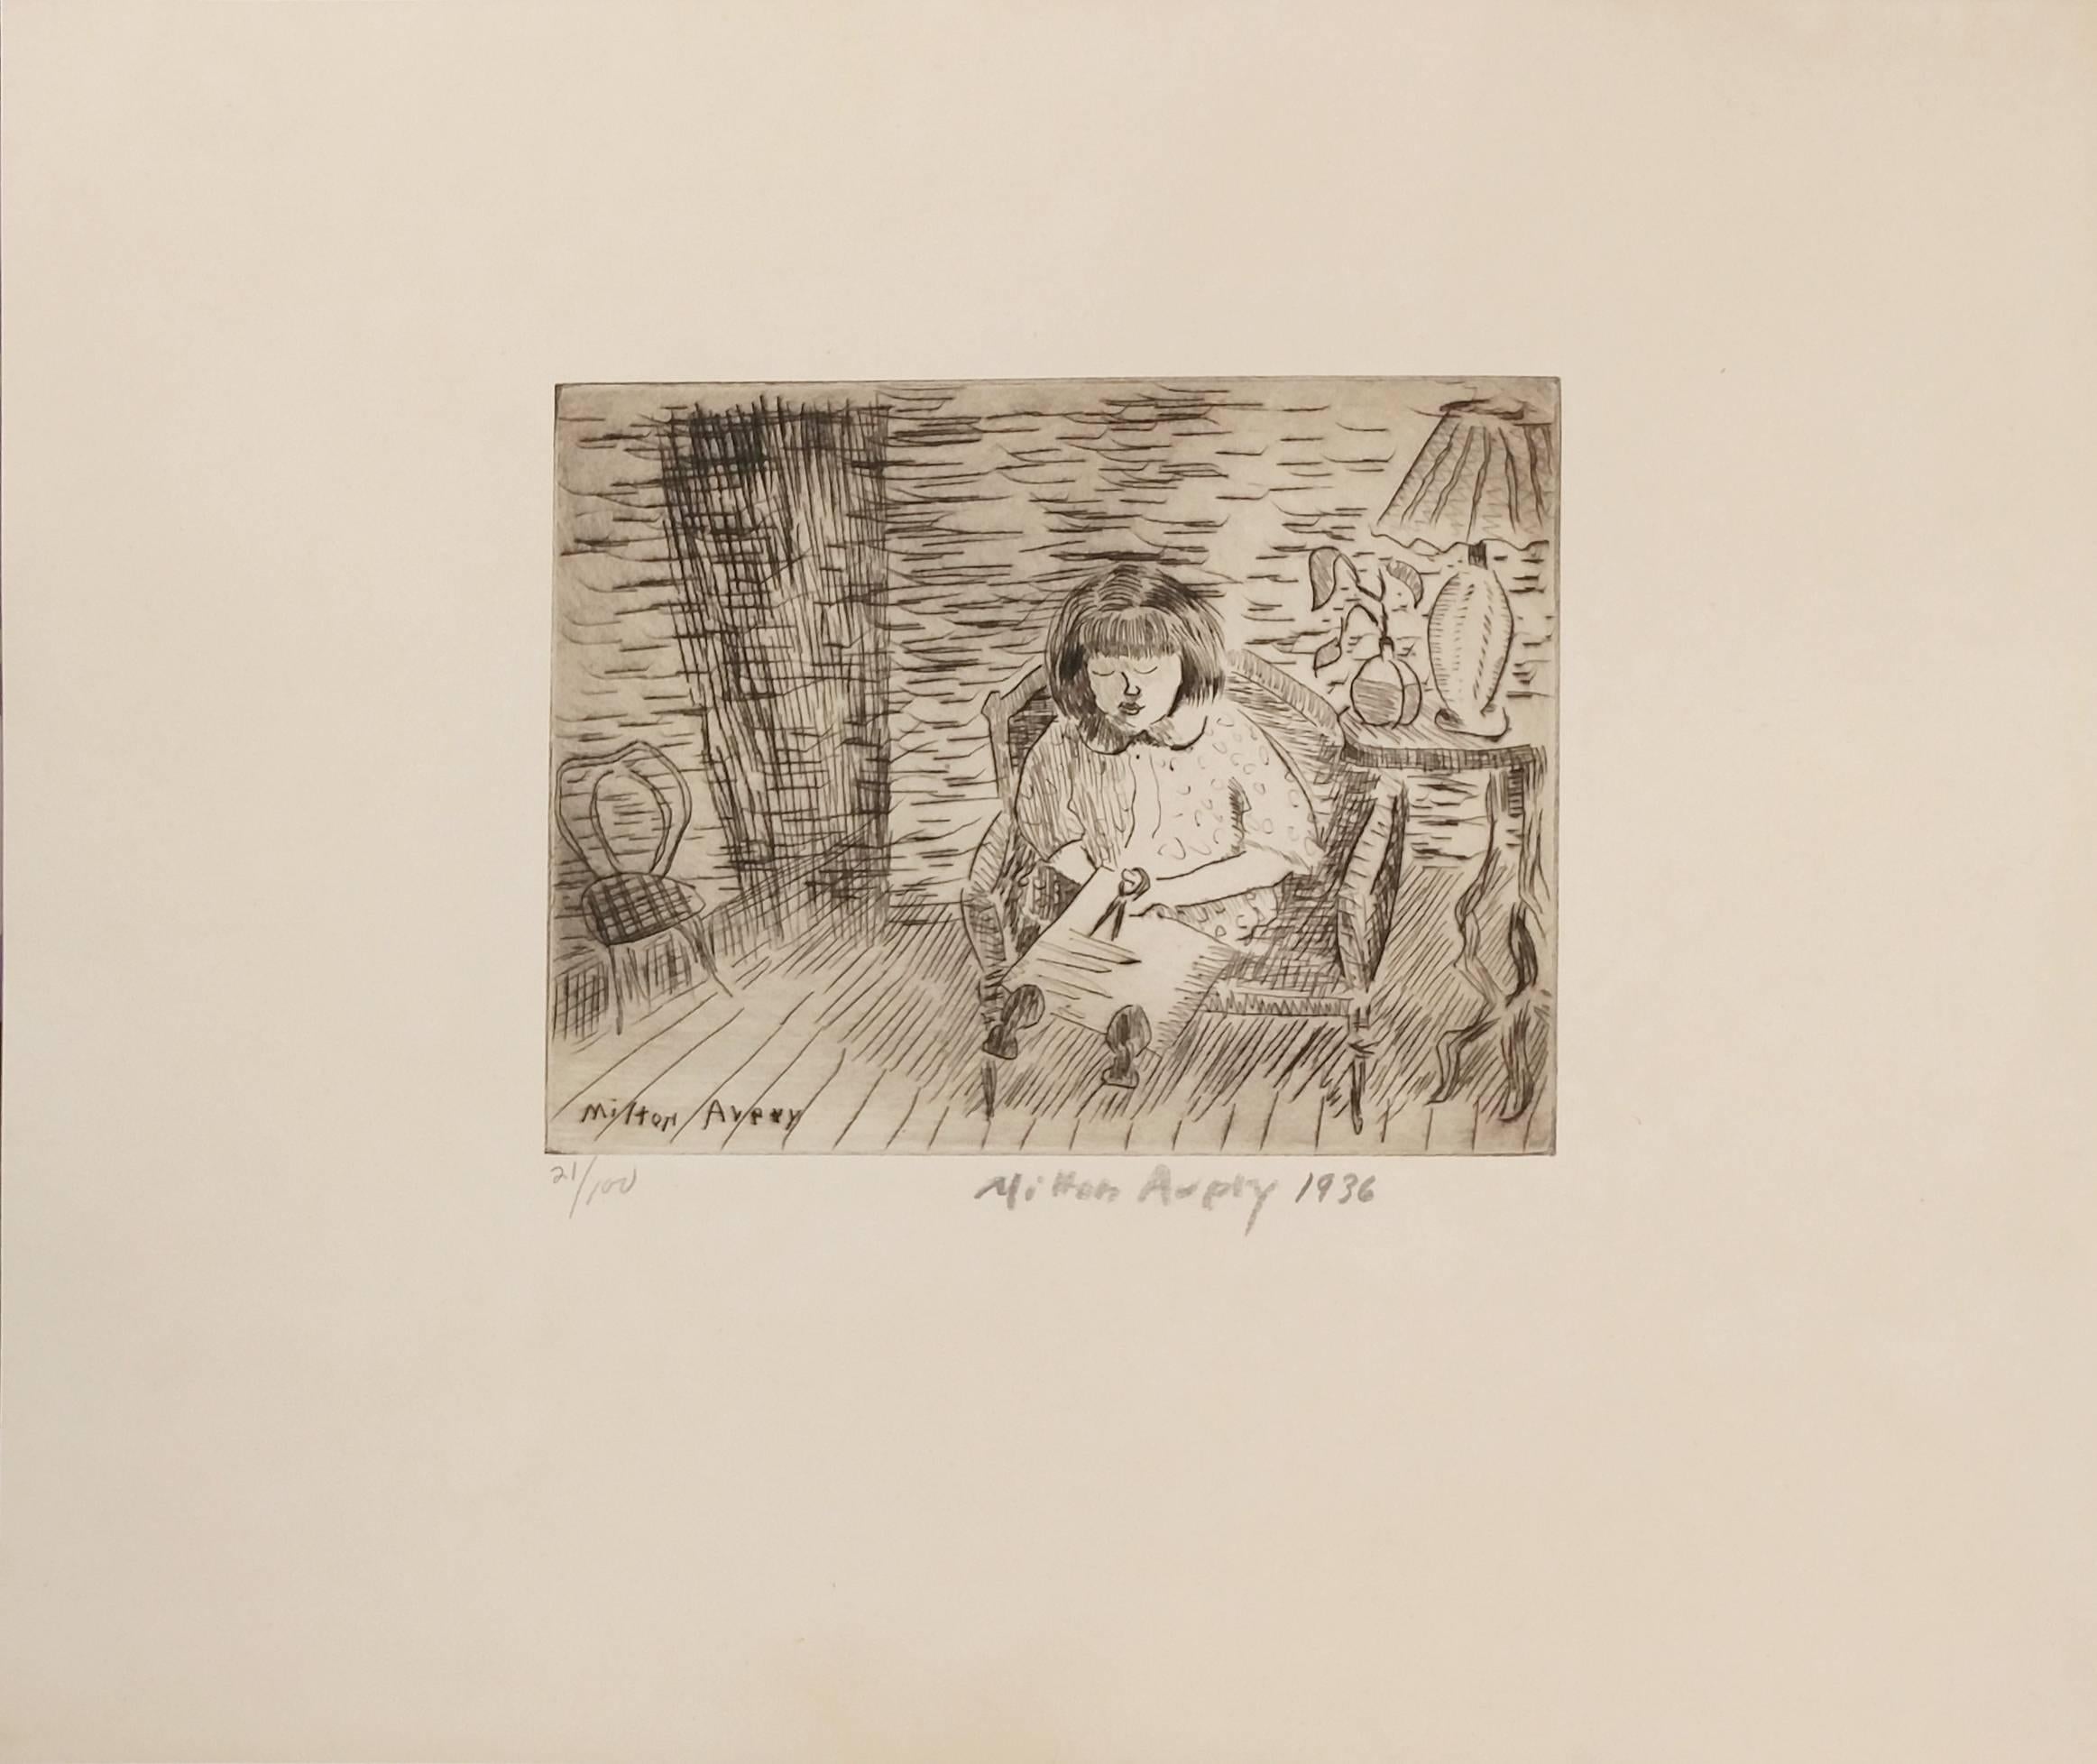 A CHILD CUTTING - Print by Milton Avery